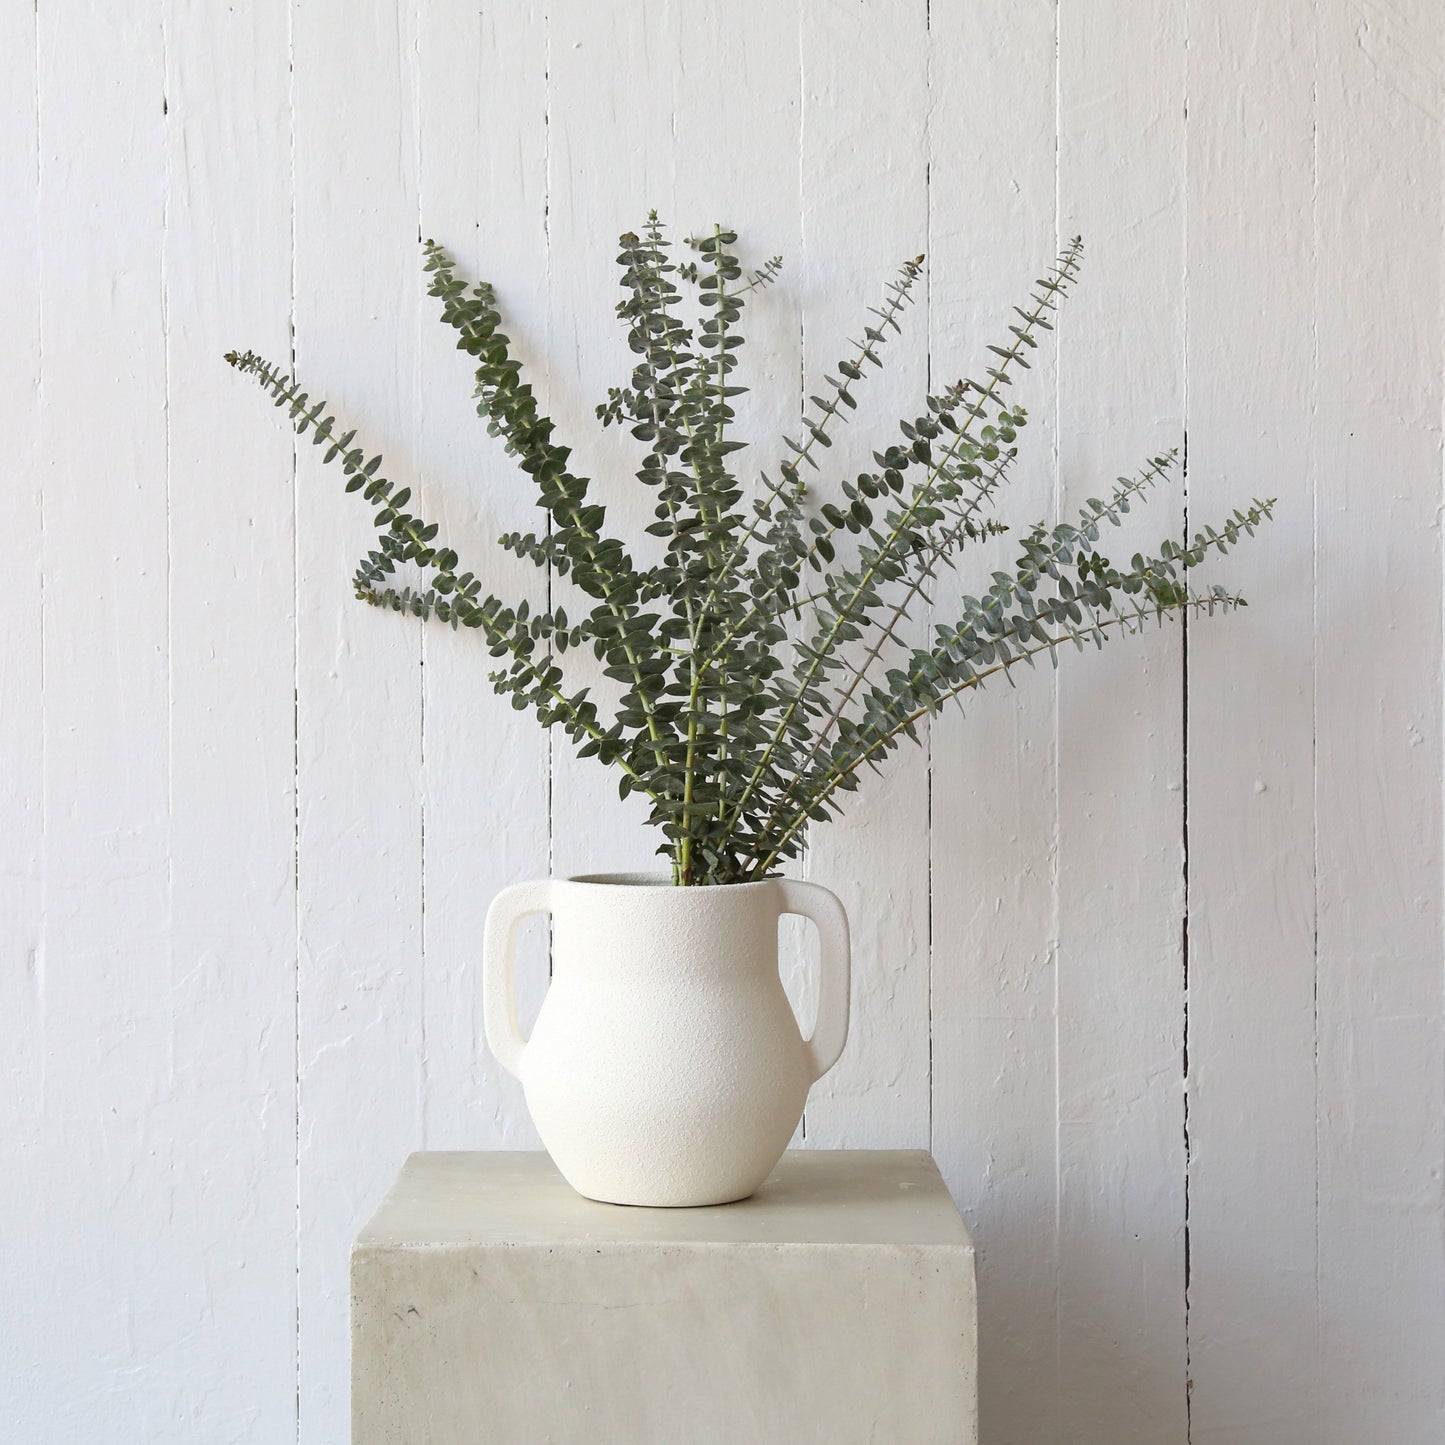 Bunches of fresh eucalyptus available at Rook & Rose.